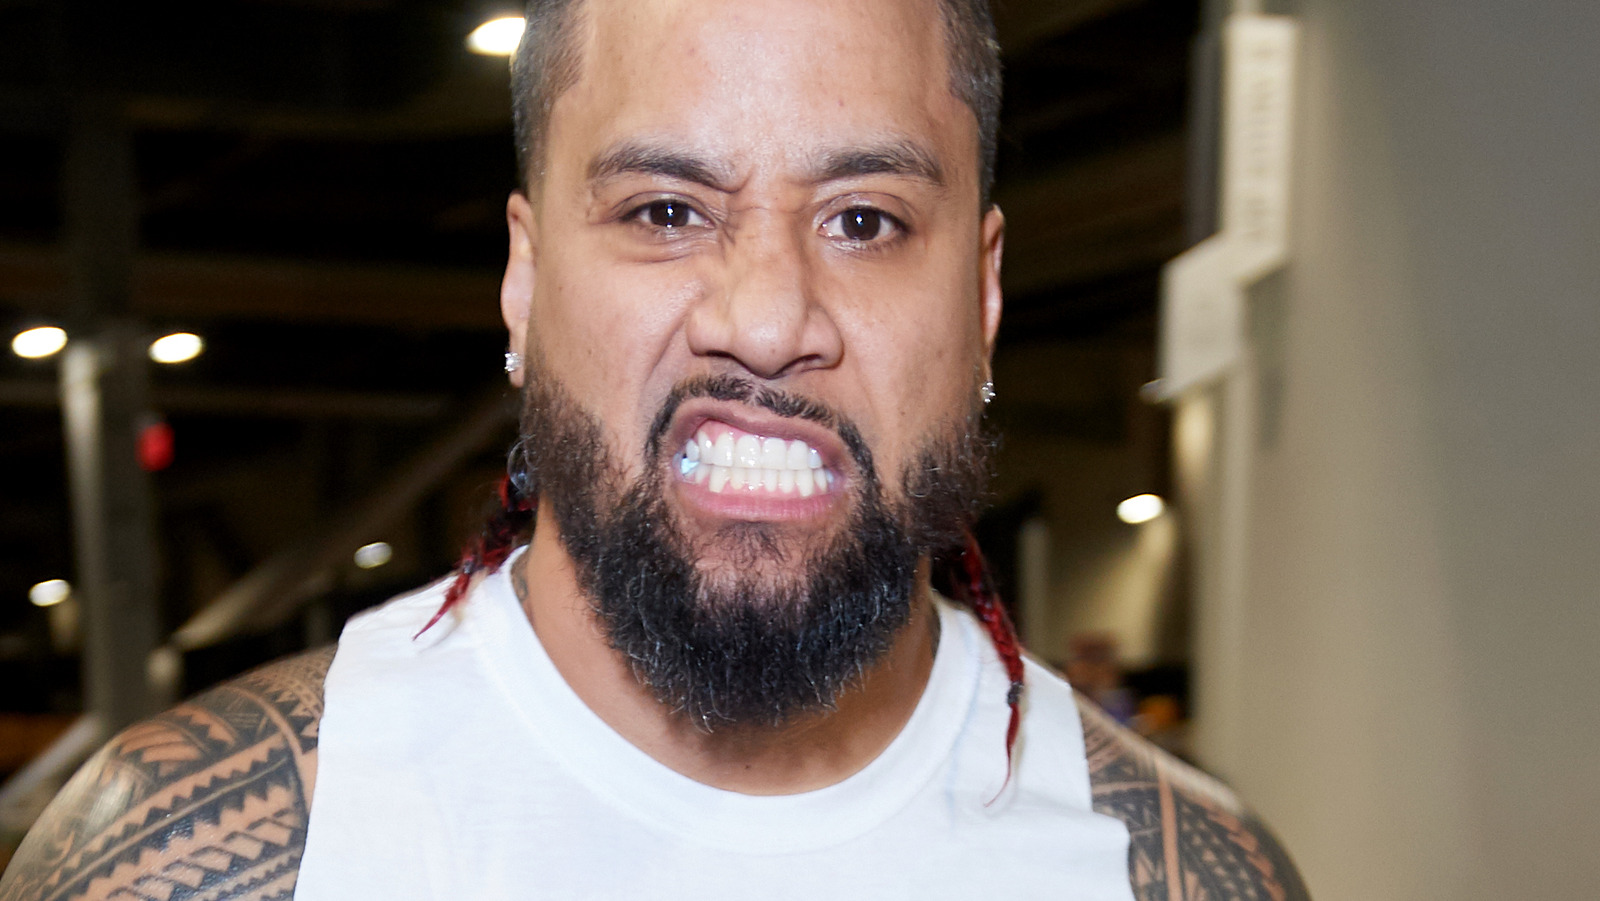 Jimmy Uso Turns On Roman Reigns, Costs Him The Tag Titles At WWE Night